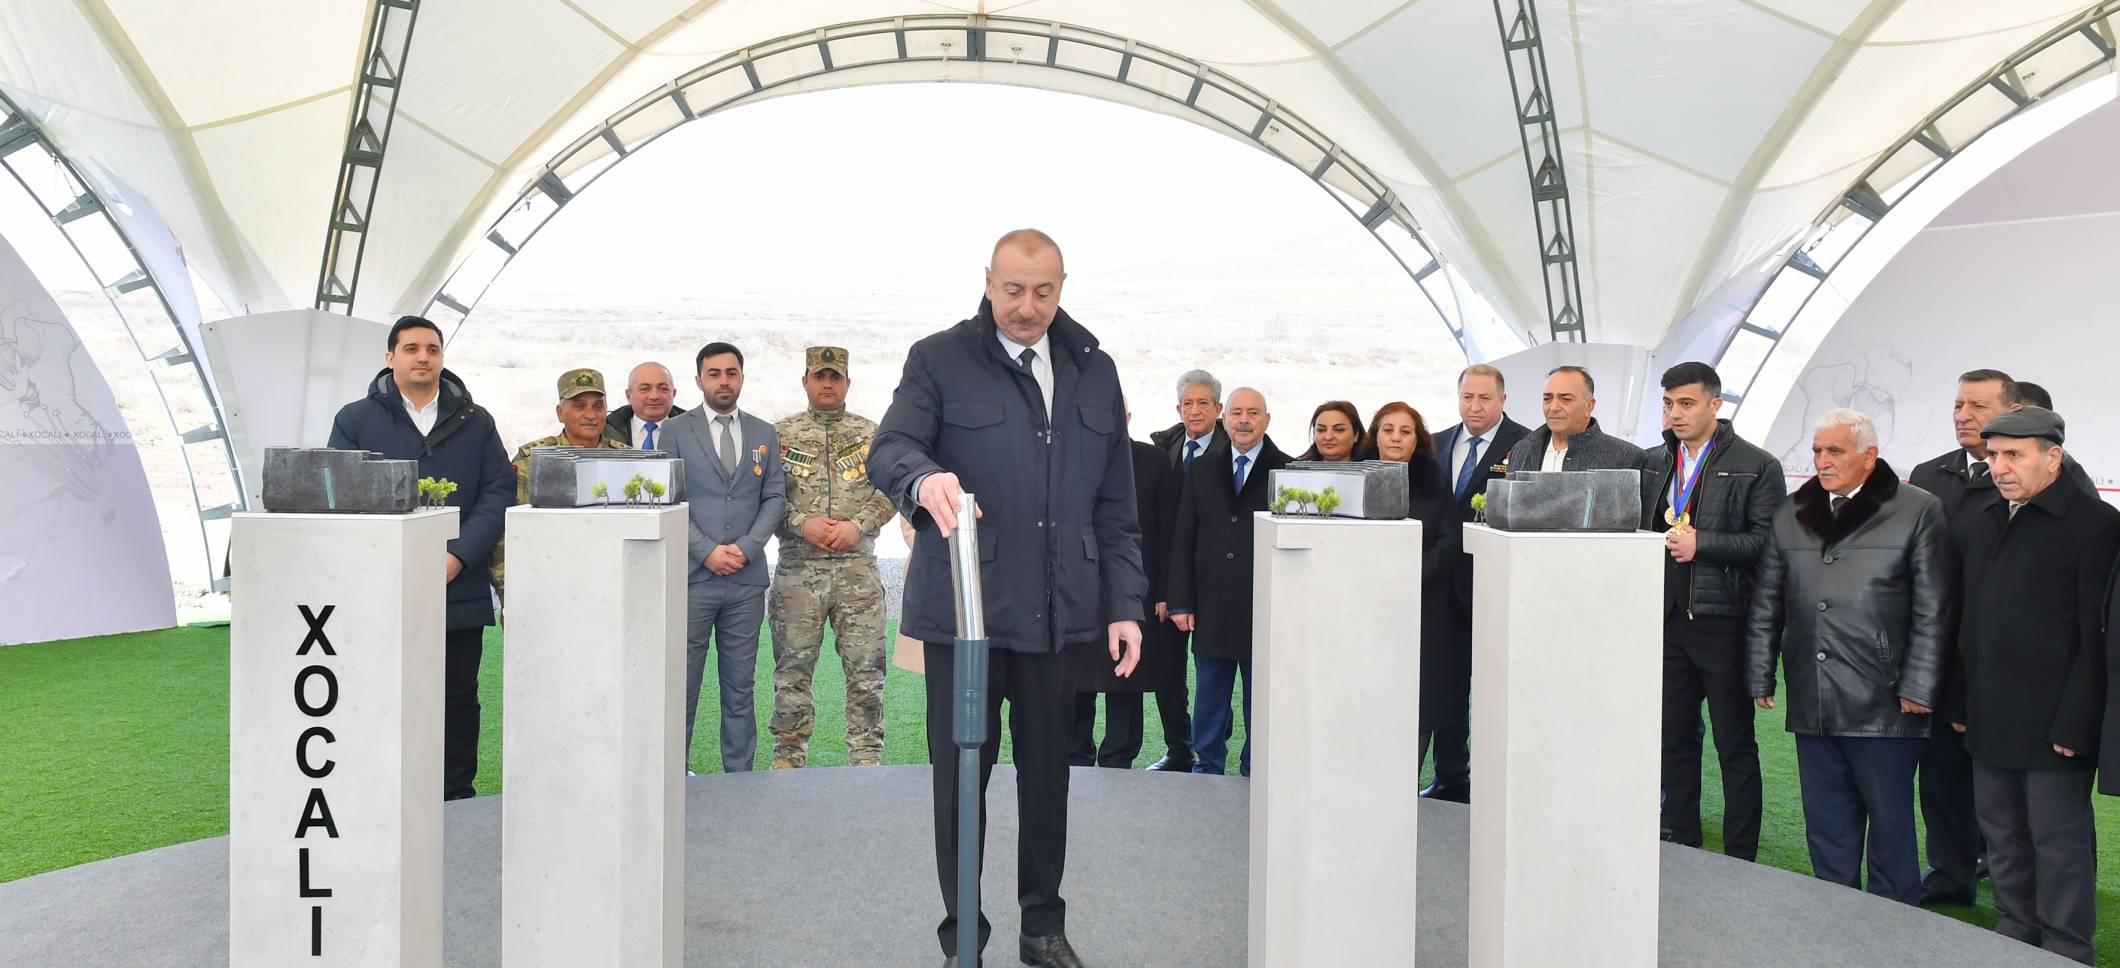 Ilham Aliyev laid foundation stone for Khojaly genocide memorial and met with representatives of general public